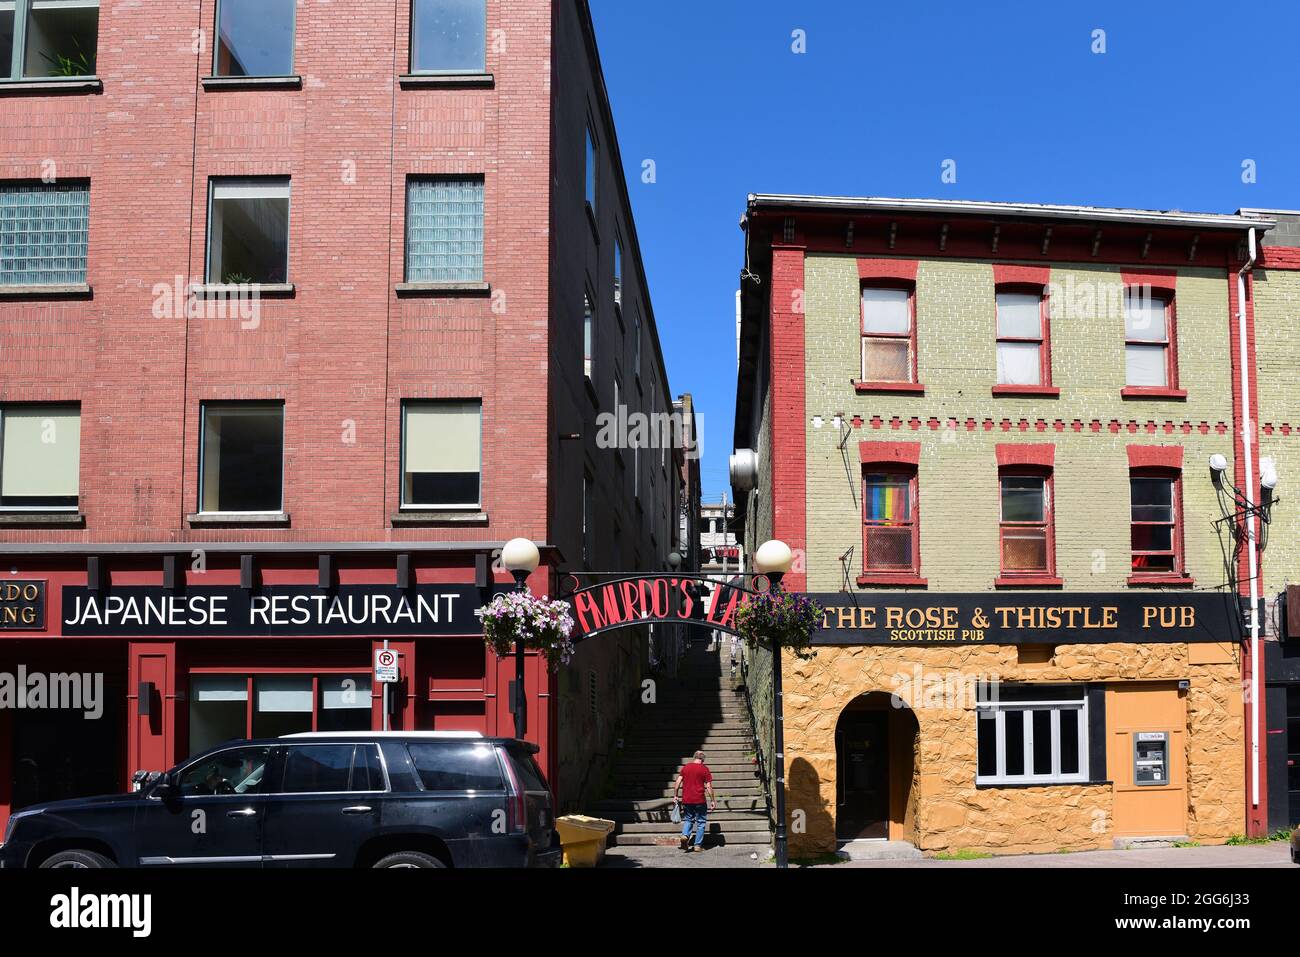 St. John's, Newfoundland, Canada - August 11, 2018: McMurdo's Lane a walking lane that connects Water and Duckworth Streets with restaurants and bars Stock Photo